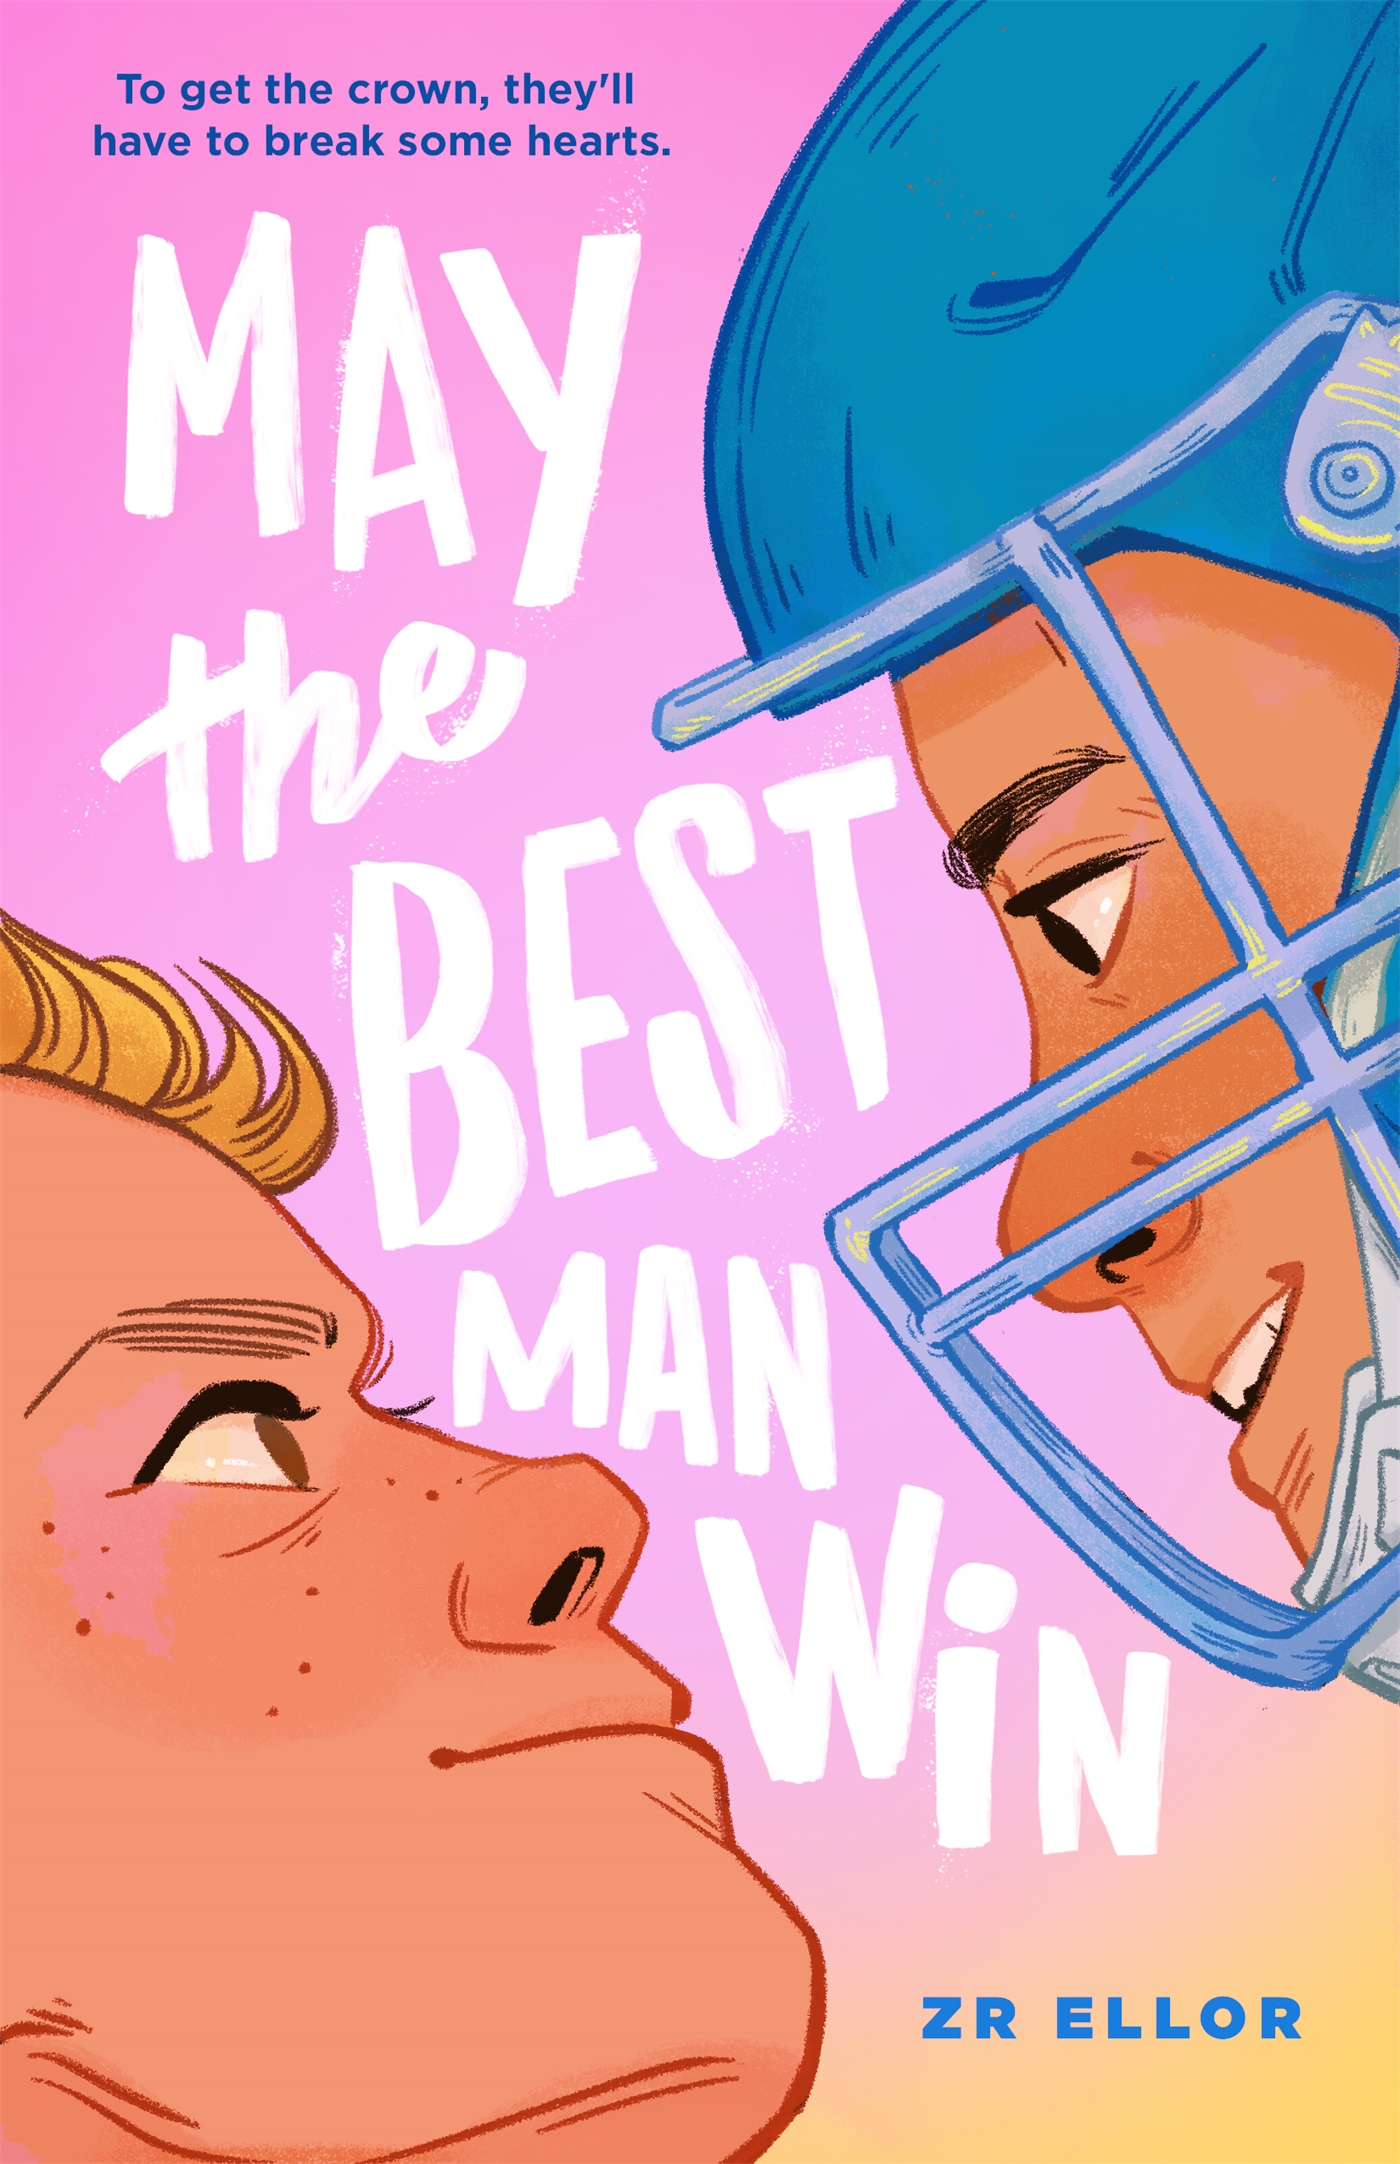 May the Best Man Win